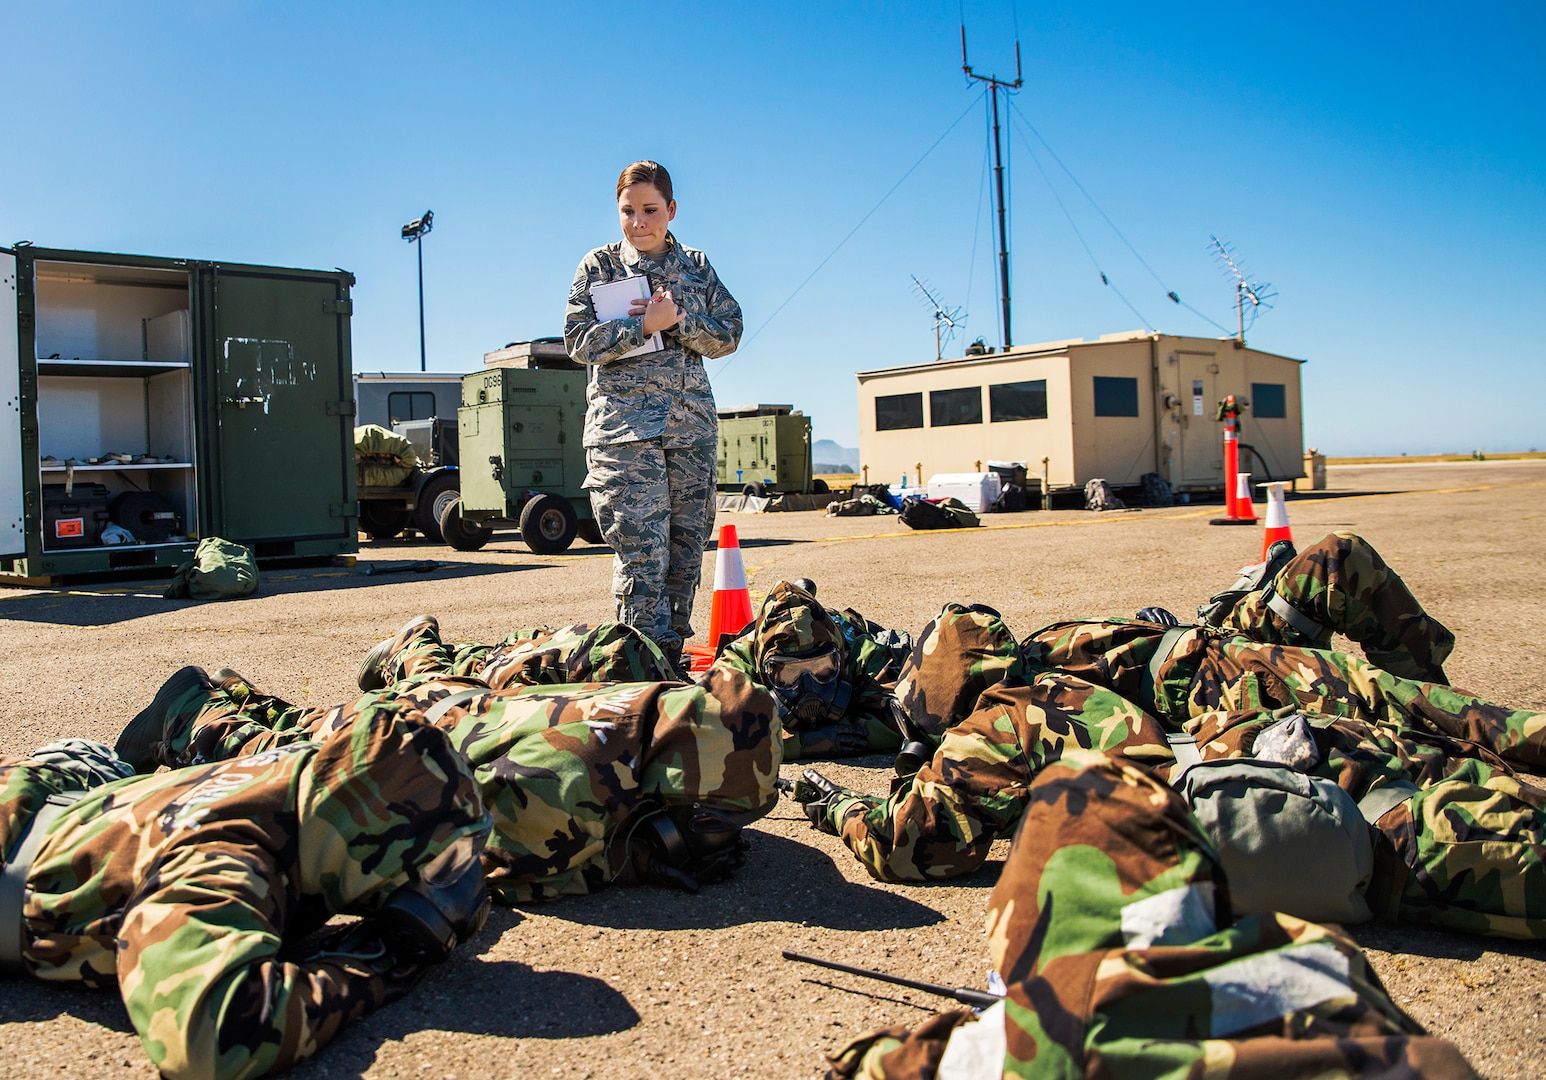 Staff Sgt. Amy Dennis, 433rd Contingency Response Element emergency management representative, inspects Airmen in Mission Oriented Protective Posture Level 4 during exercise Patriot Hook April 30, 2017 at Vandenberg Air Force Base, California. Patriot Hook is an annual joint-service exercise coordinated by the Air Force Reserve, designed to integrate the military and first responders of federal, state and local agencies by providing training to mobilize quickly and deploying in military aircraft in the event of a regional emergency or natural disaster. (U.S. Air Force photo by Benjamin Faske)